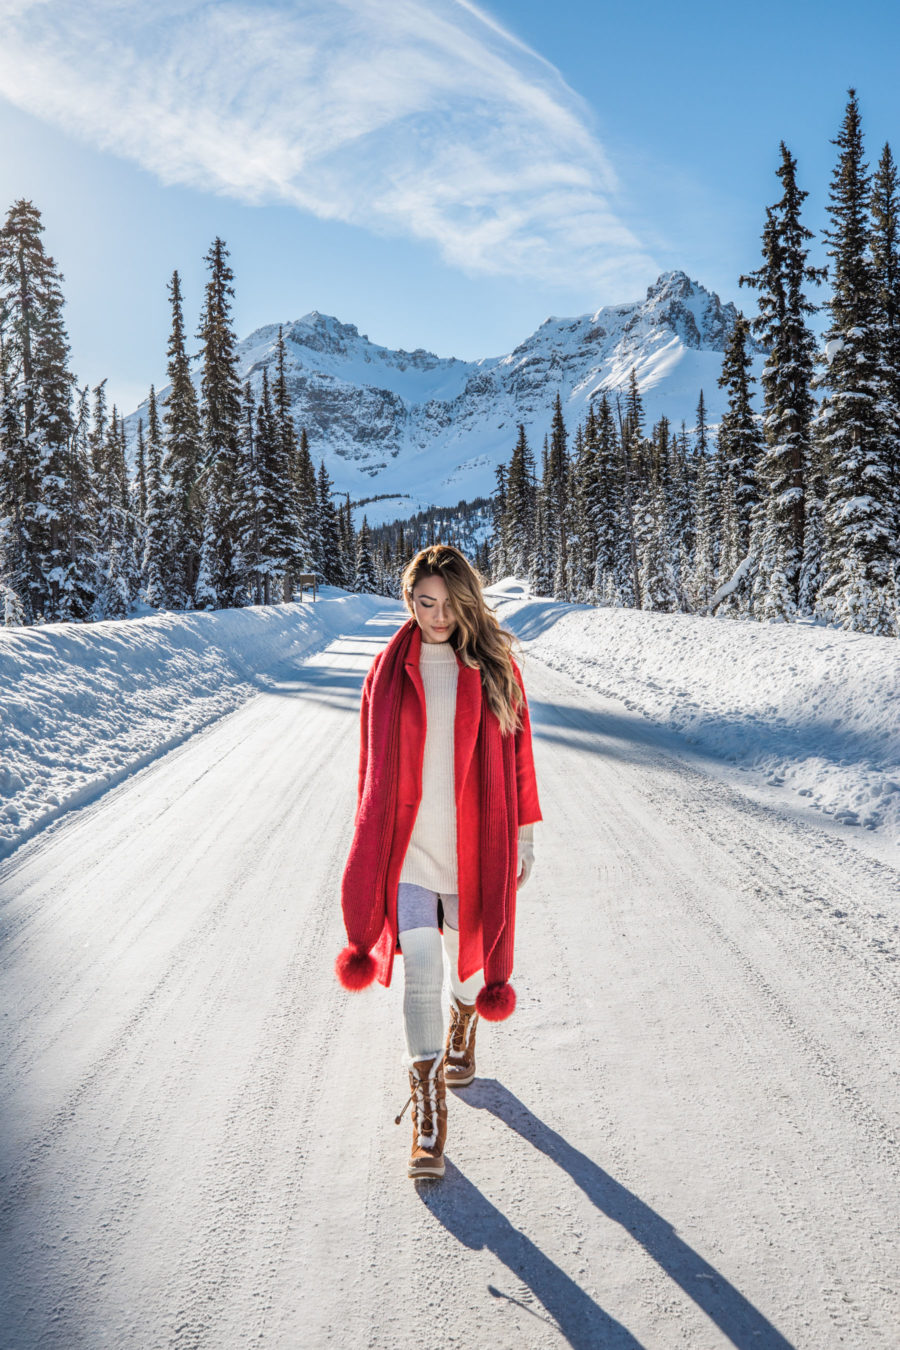 Banff Travel Guide - Red Coat with Pom Pom Scarf and Snow Boots // Notjessfashion.com